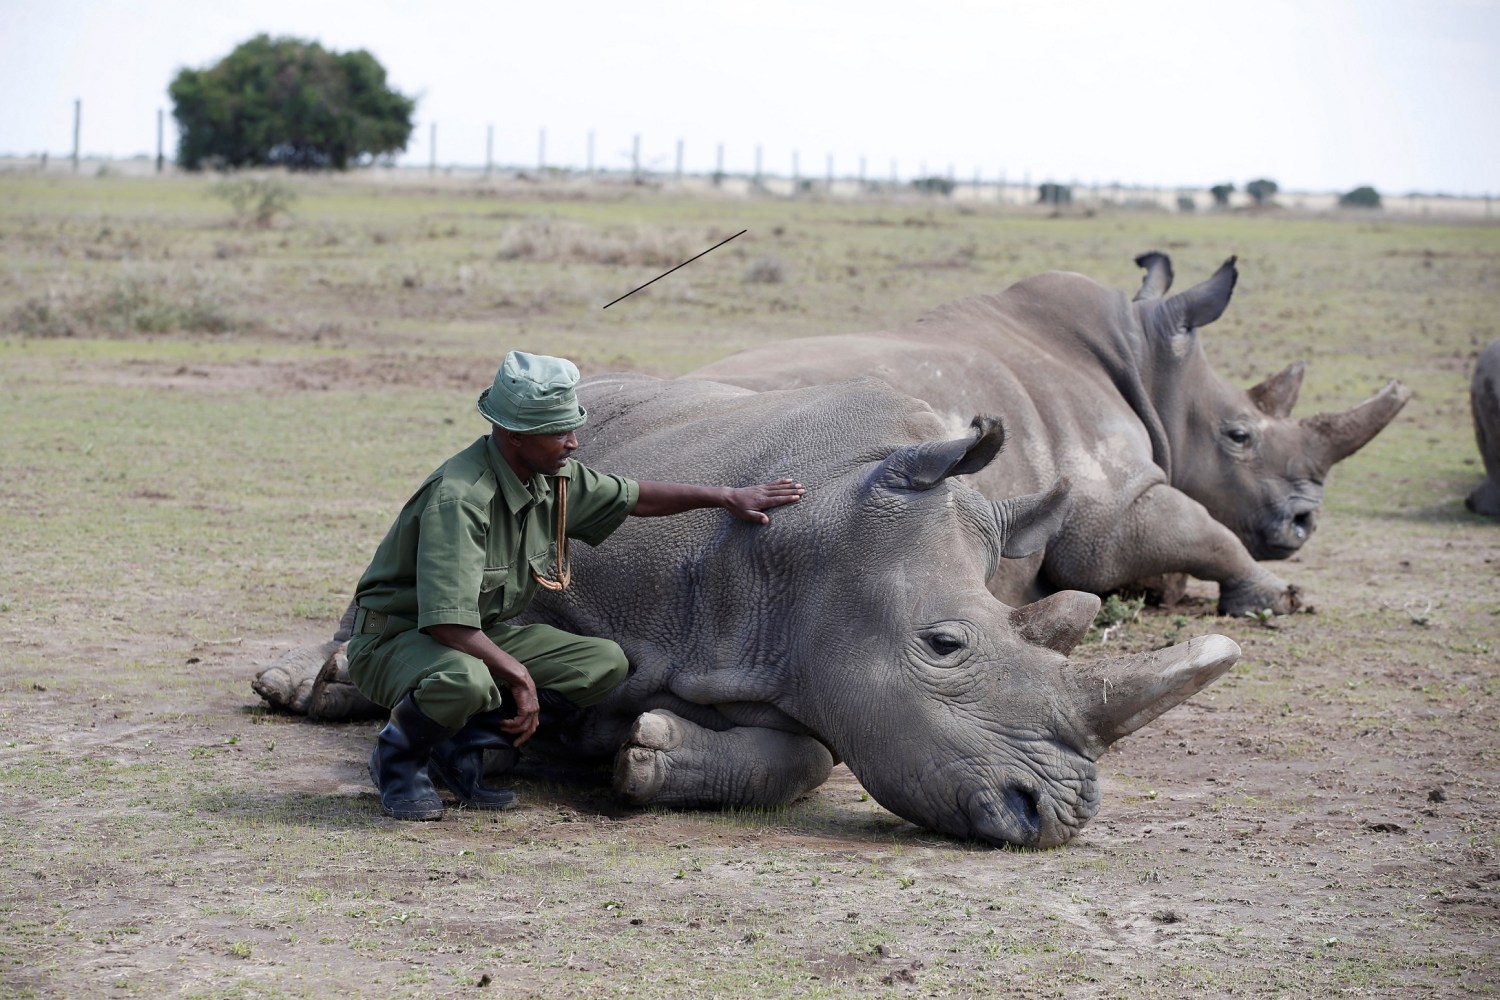 A warden watches over Najin (front) and her daughter Patu, the last two northern white rhino females, in their enclosure at the Ol Pejeta Conservancy in Laikipia National Park, Kenya March 7, 2018. REUTERS/Baz Ratner - RC1B32B67E80